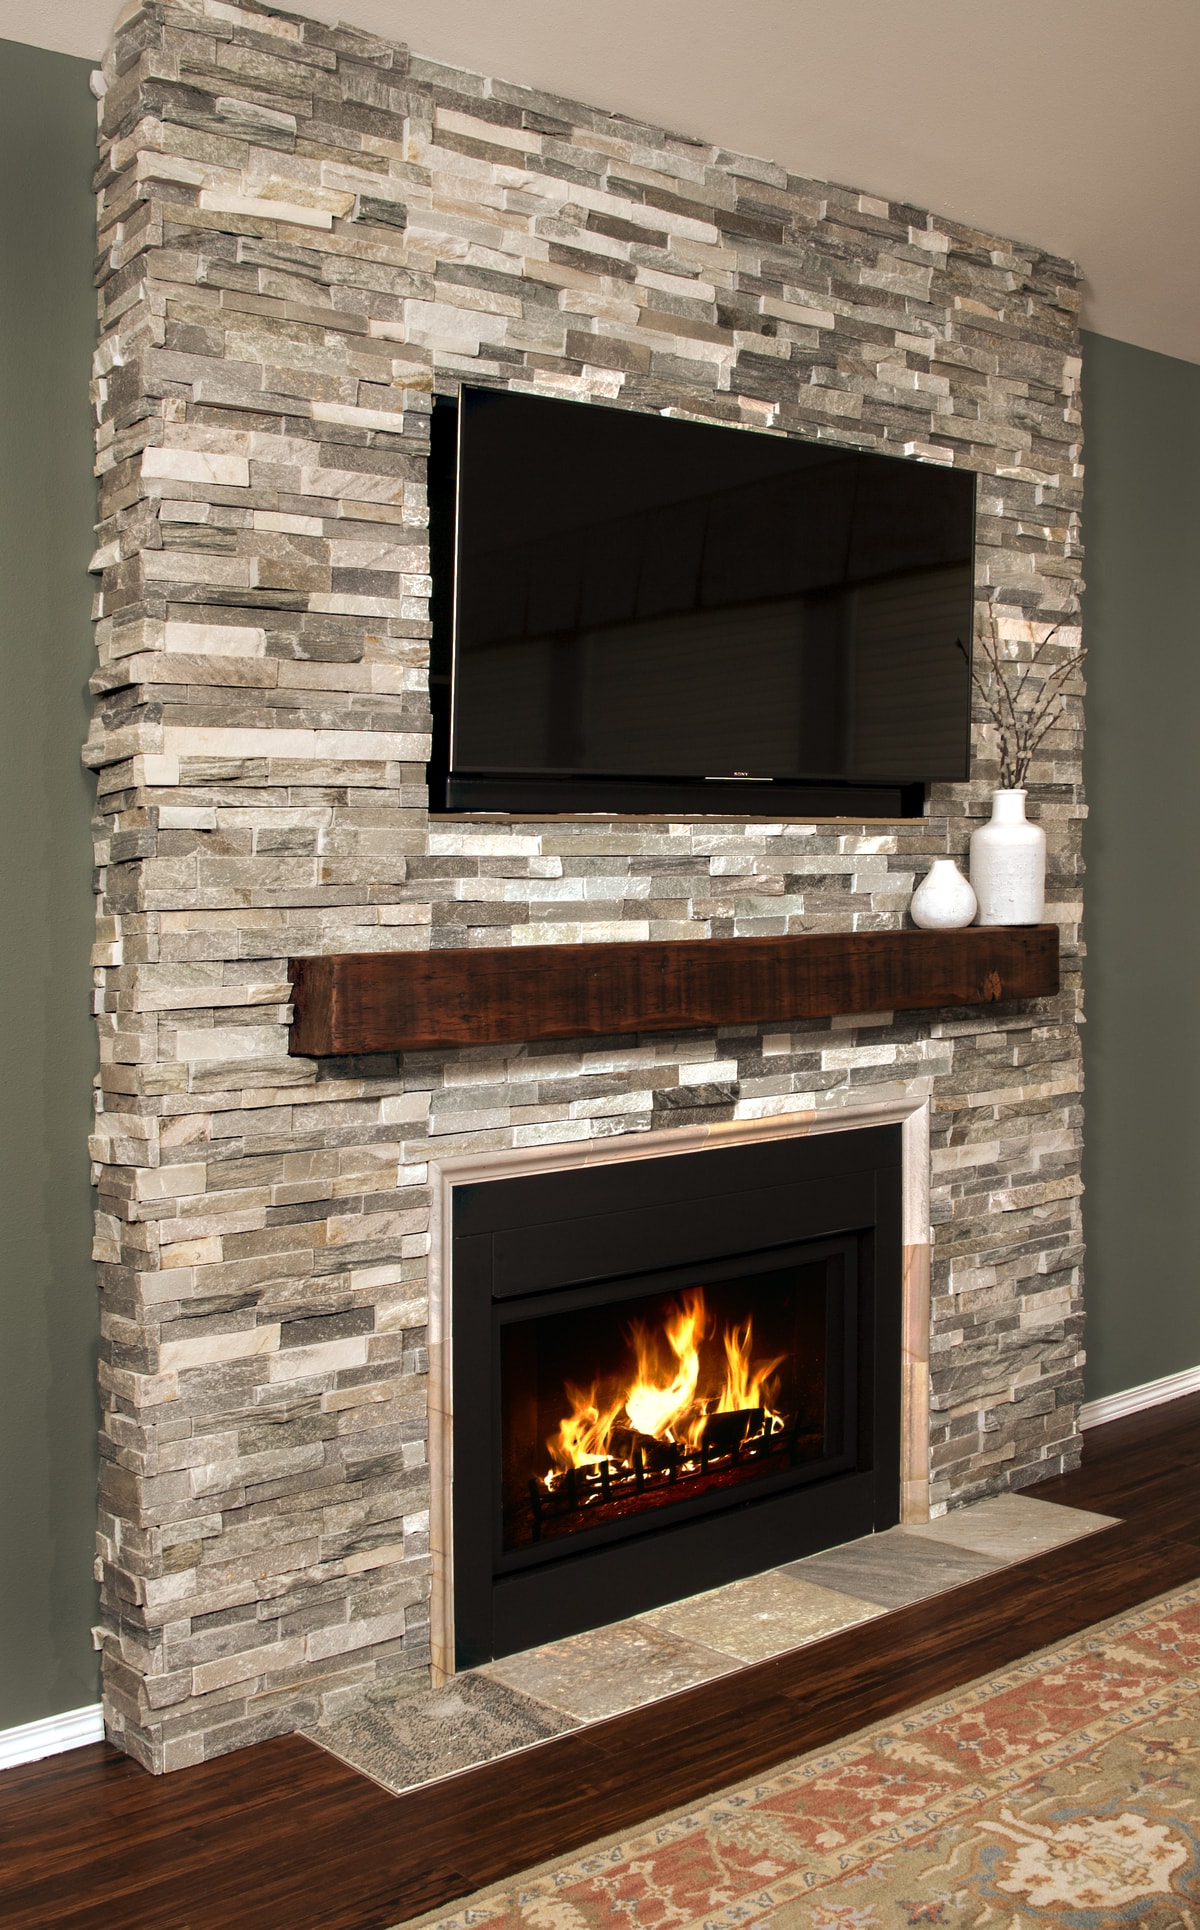 Stacked Stone Fireplaces with Mantle Inspirational Living Room Stacked Stone Fireplace for Cool Living Room